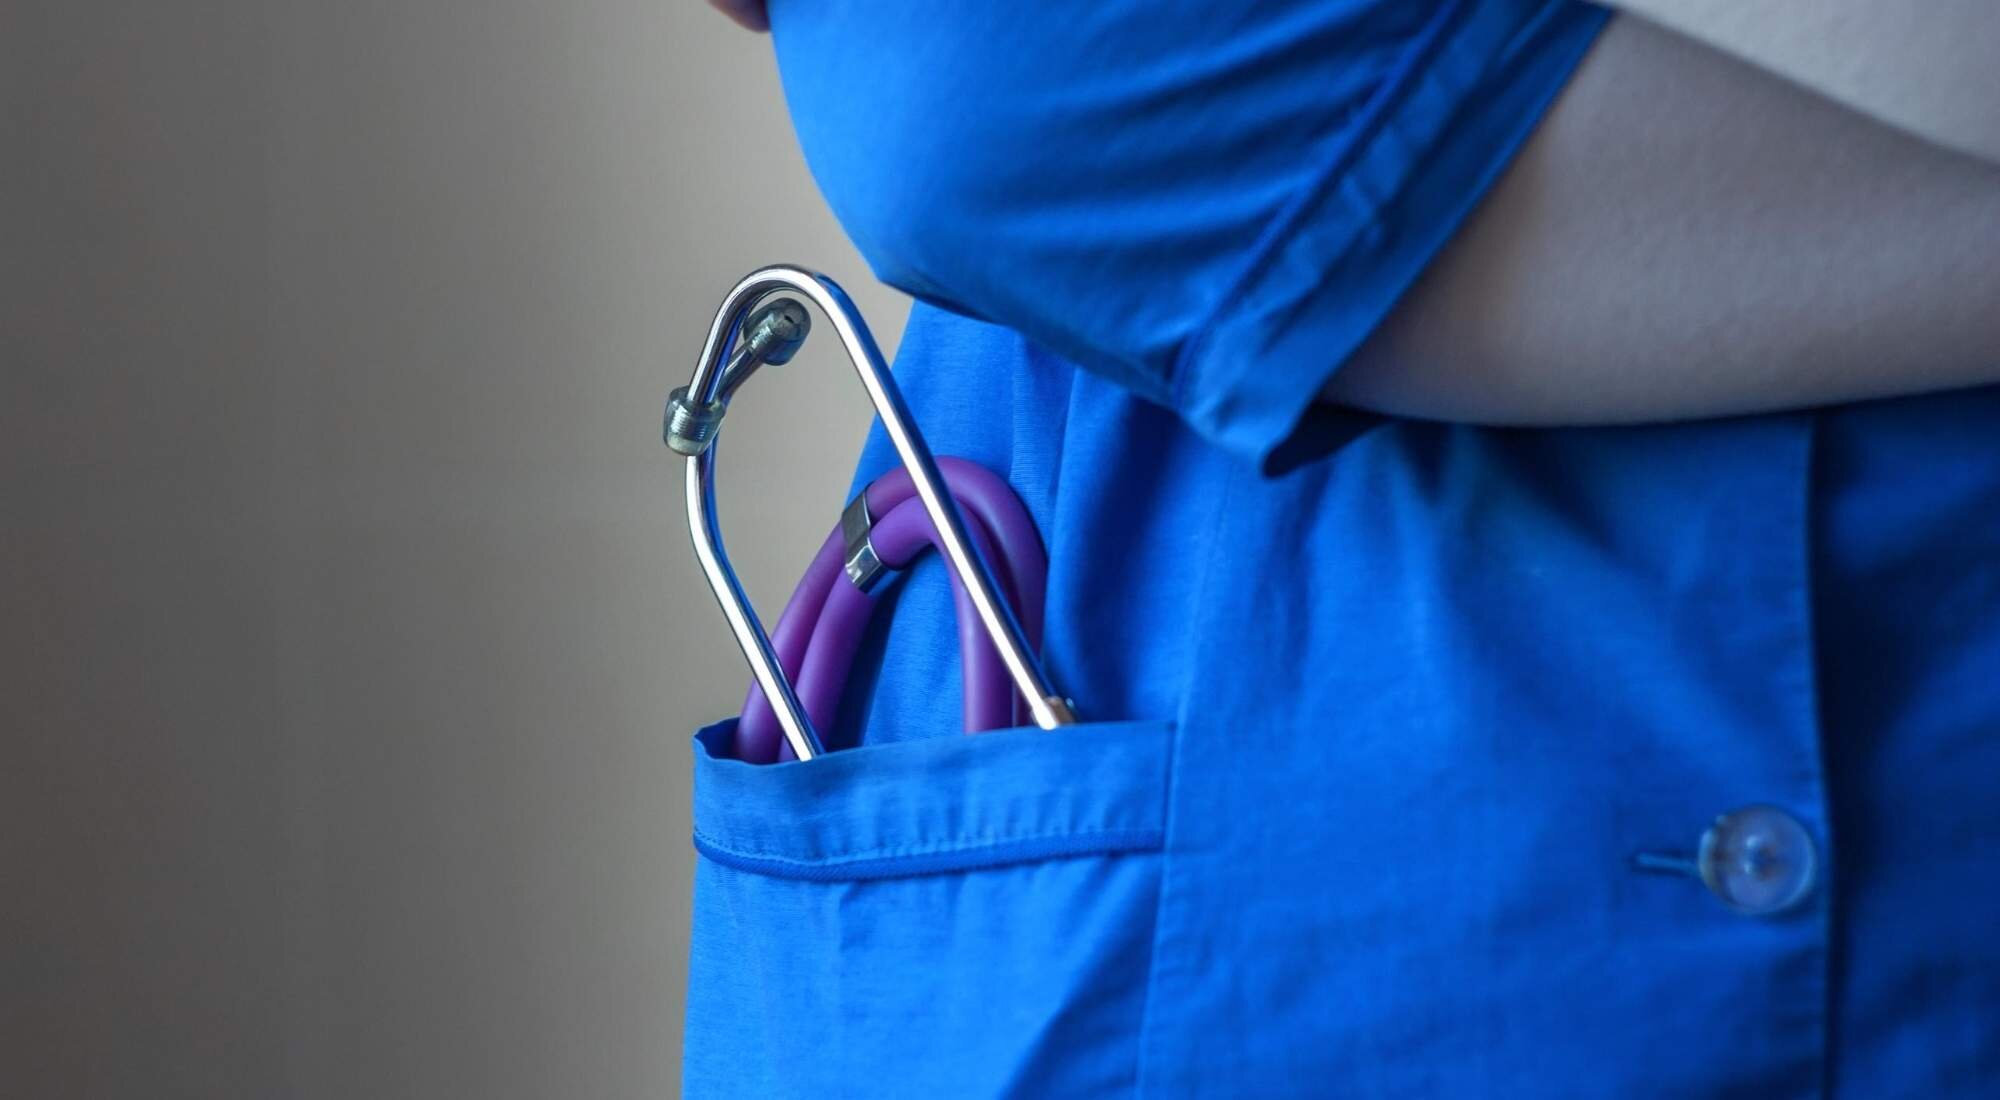 A Guide To Wearing Scrubs: How Should They Fit And What Should You